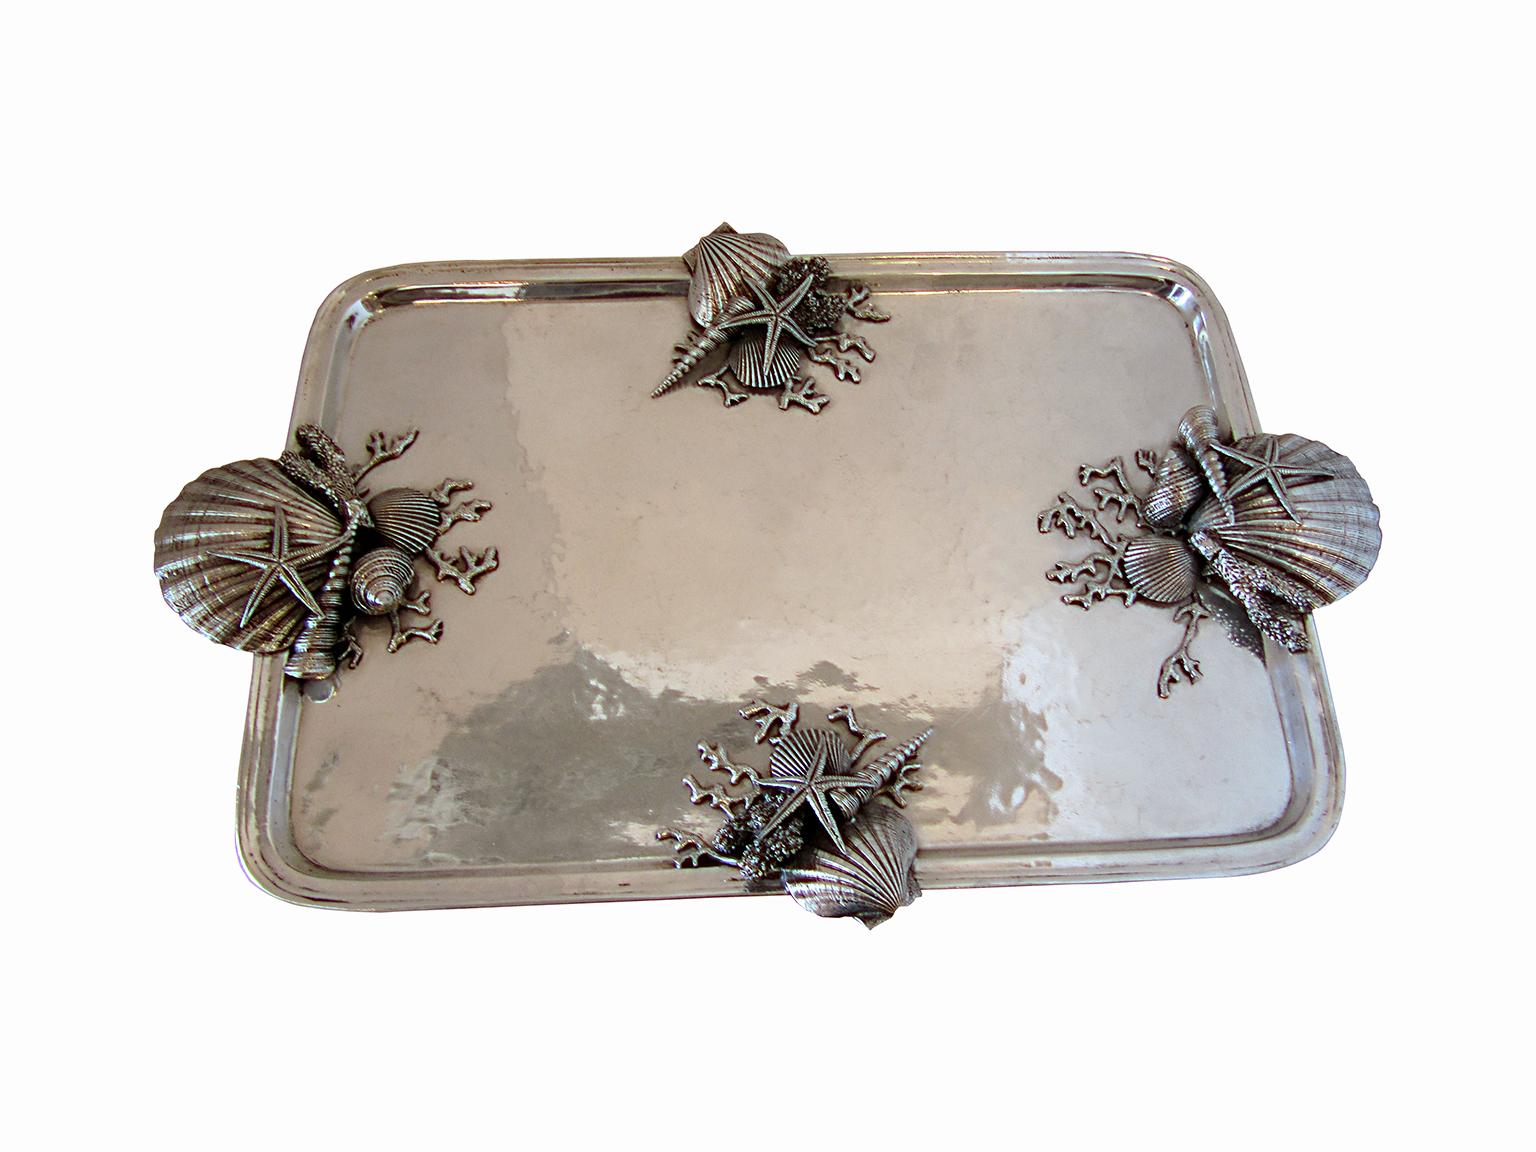 An ornate, pewter serving tray, made by Richard Cipolla in Lombardia, Italy. The handmade piece has a beautiful patina. Made with the highest grade pewter, it contains no lead or aluminum alloys, which makes it perfect for use as well as decoration.